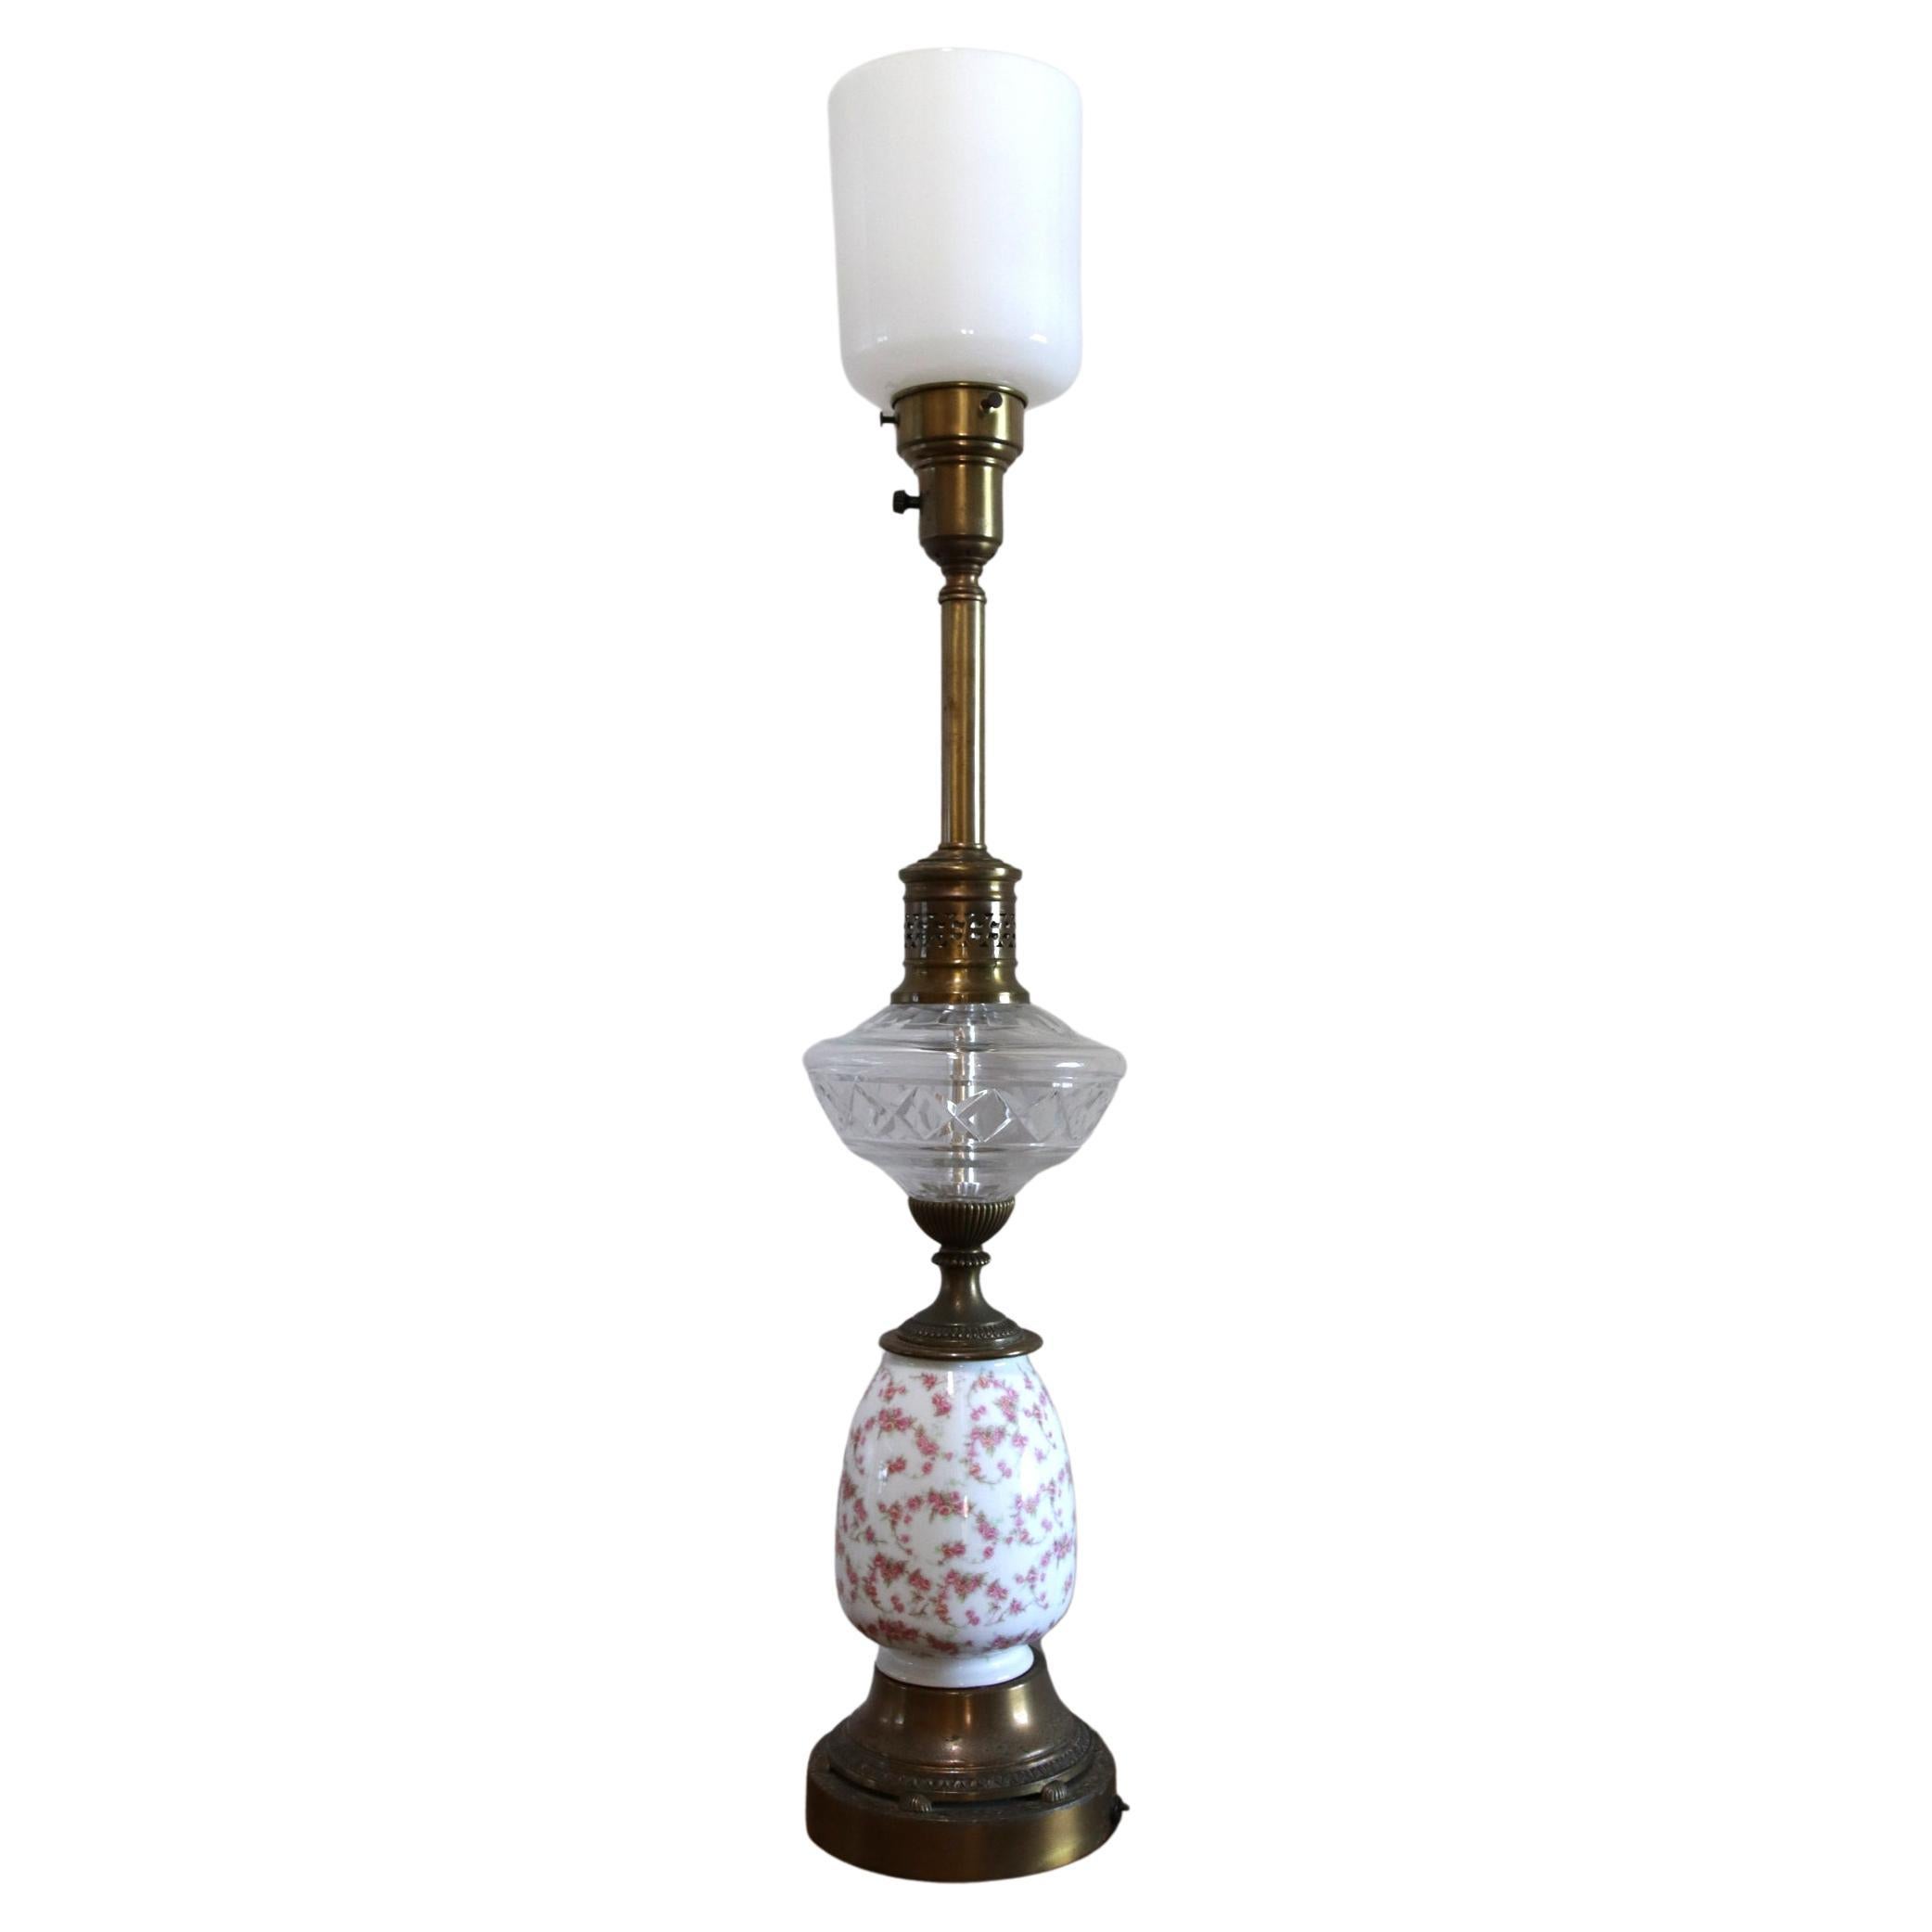 English Victorian Glass Porcelain Hand-Painted Roses Statement Brass Lamp For Sale